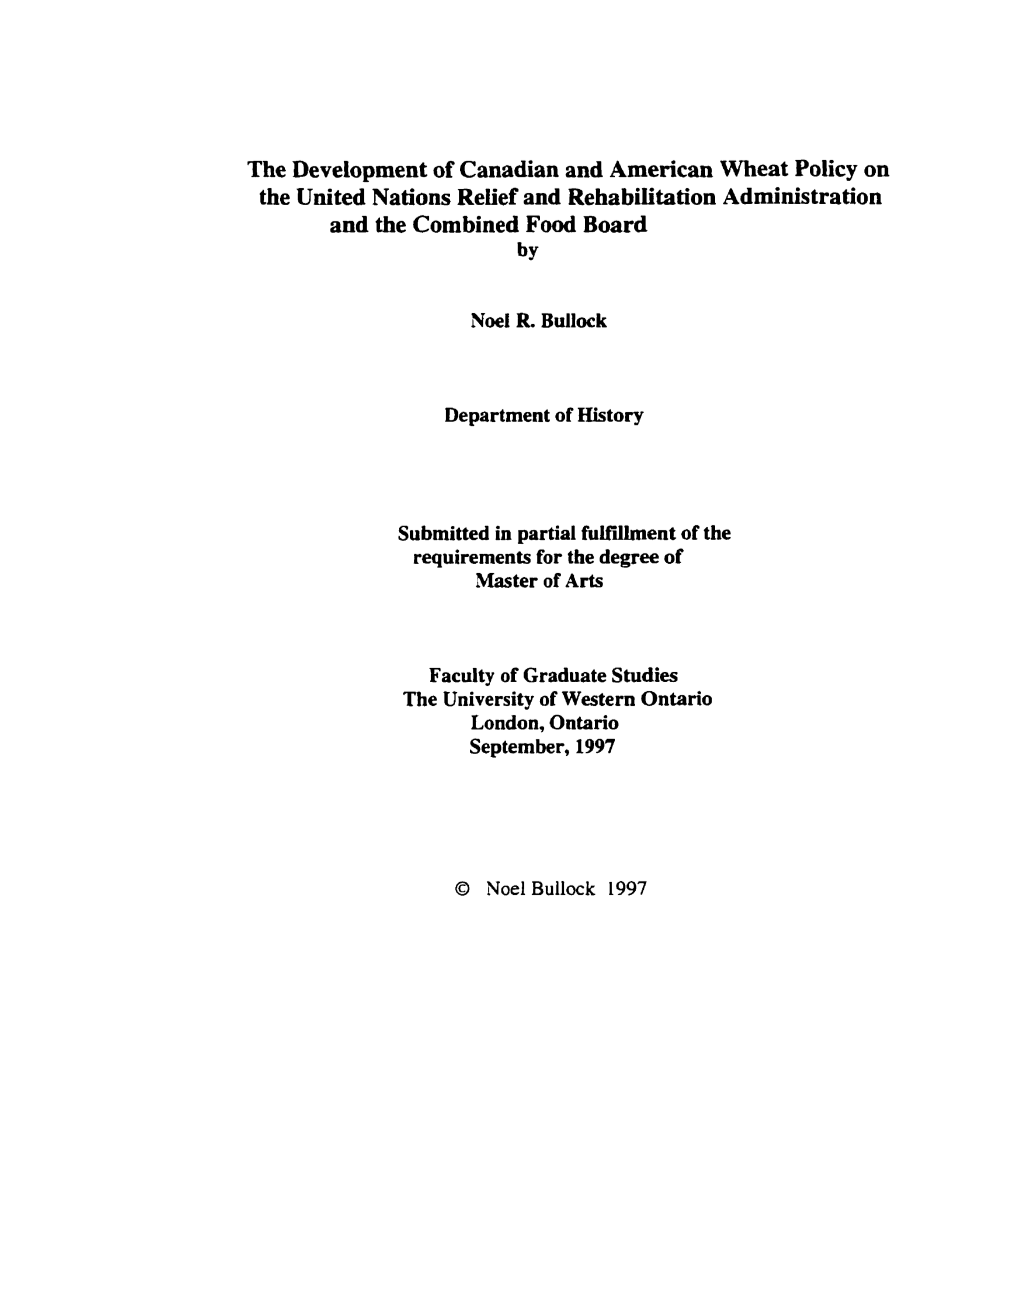 The Developrnent of Canadian and American Wheat Policy on the United Nations Reiïef and Rehabilitation Administration and the Combined Food Board By